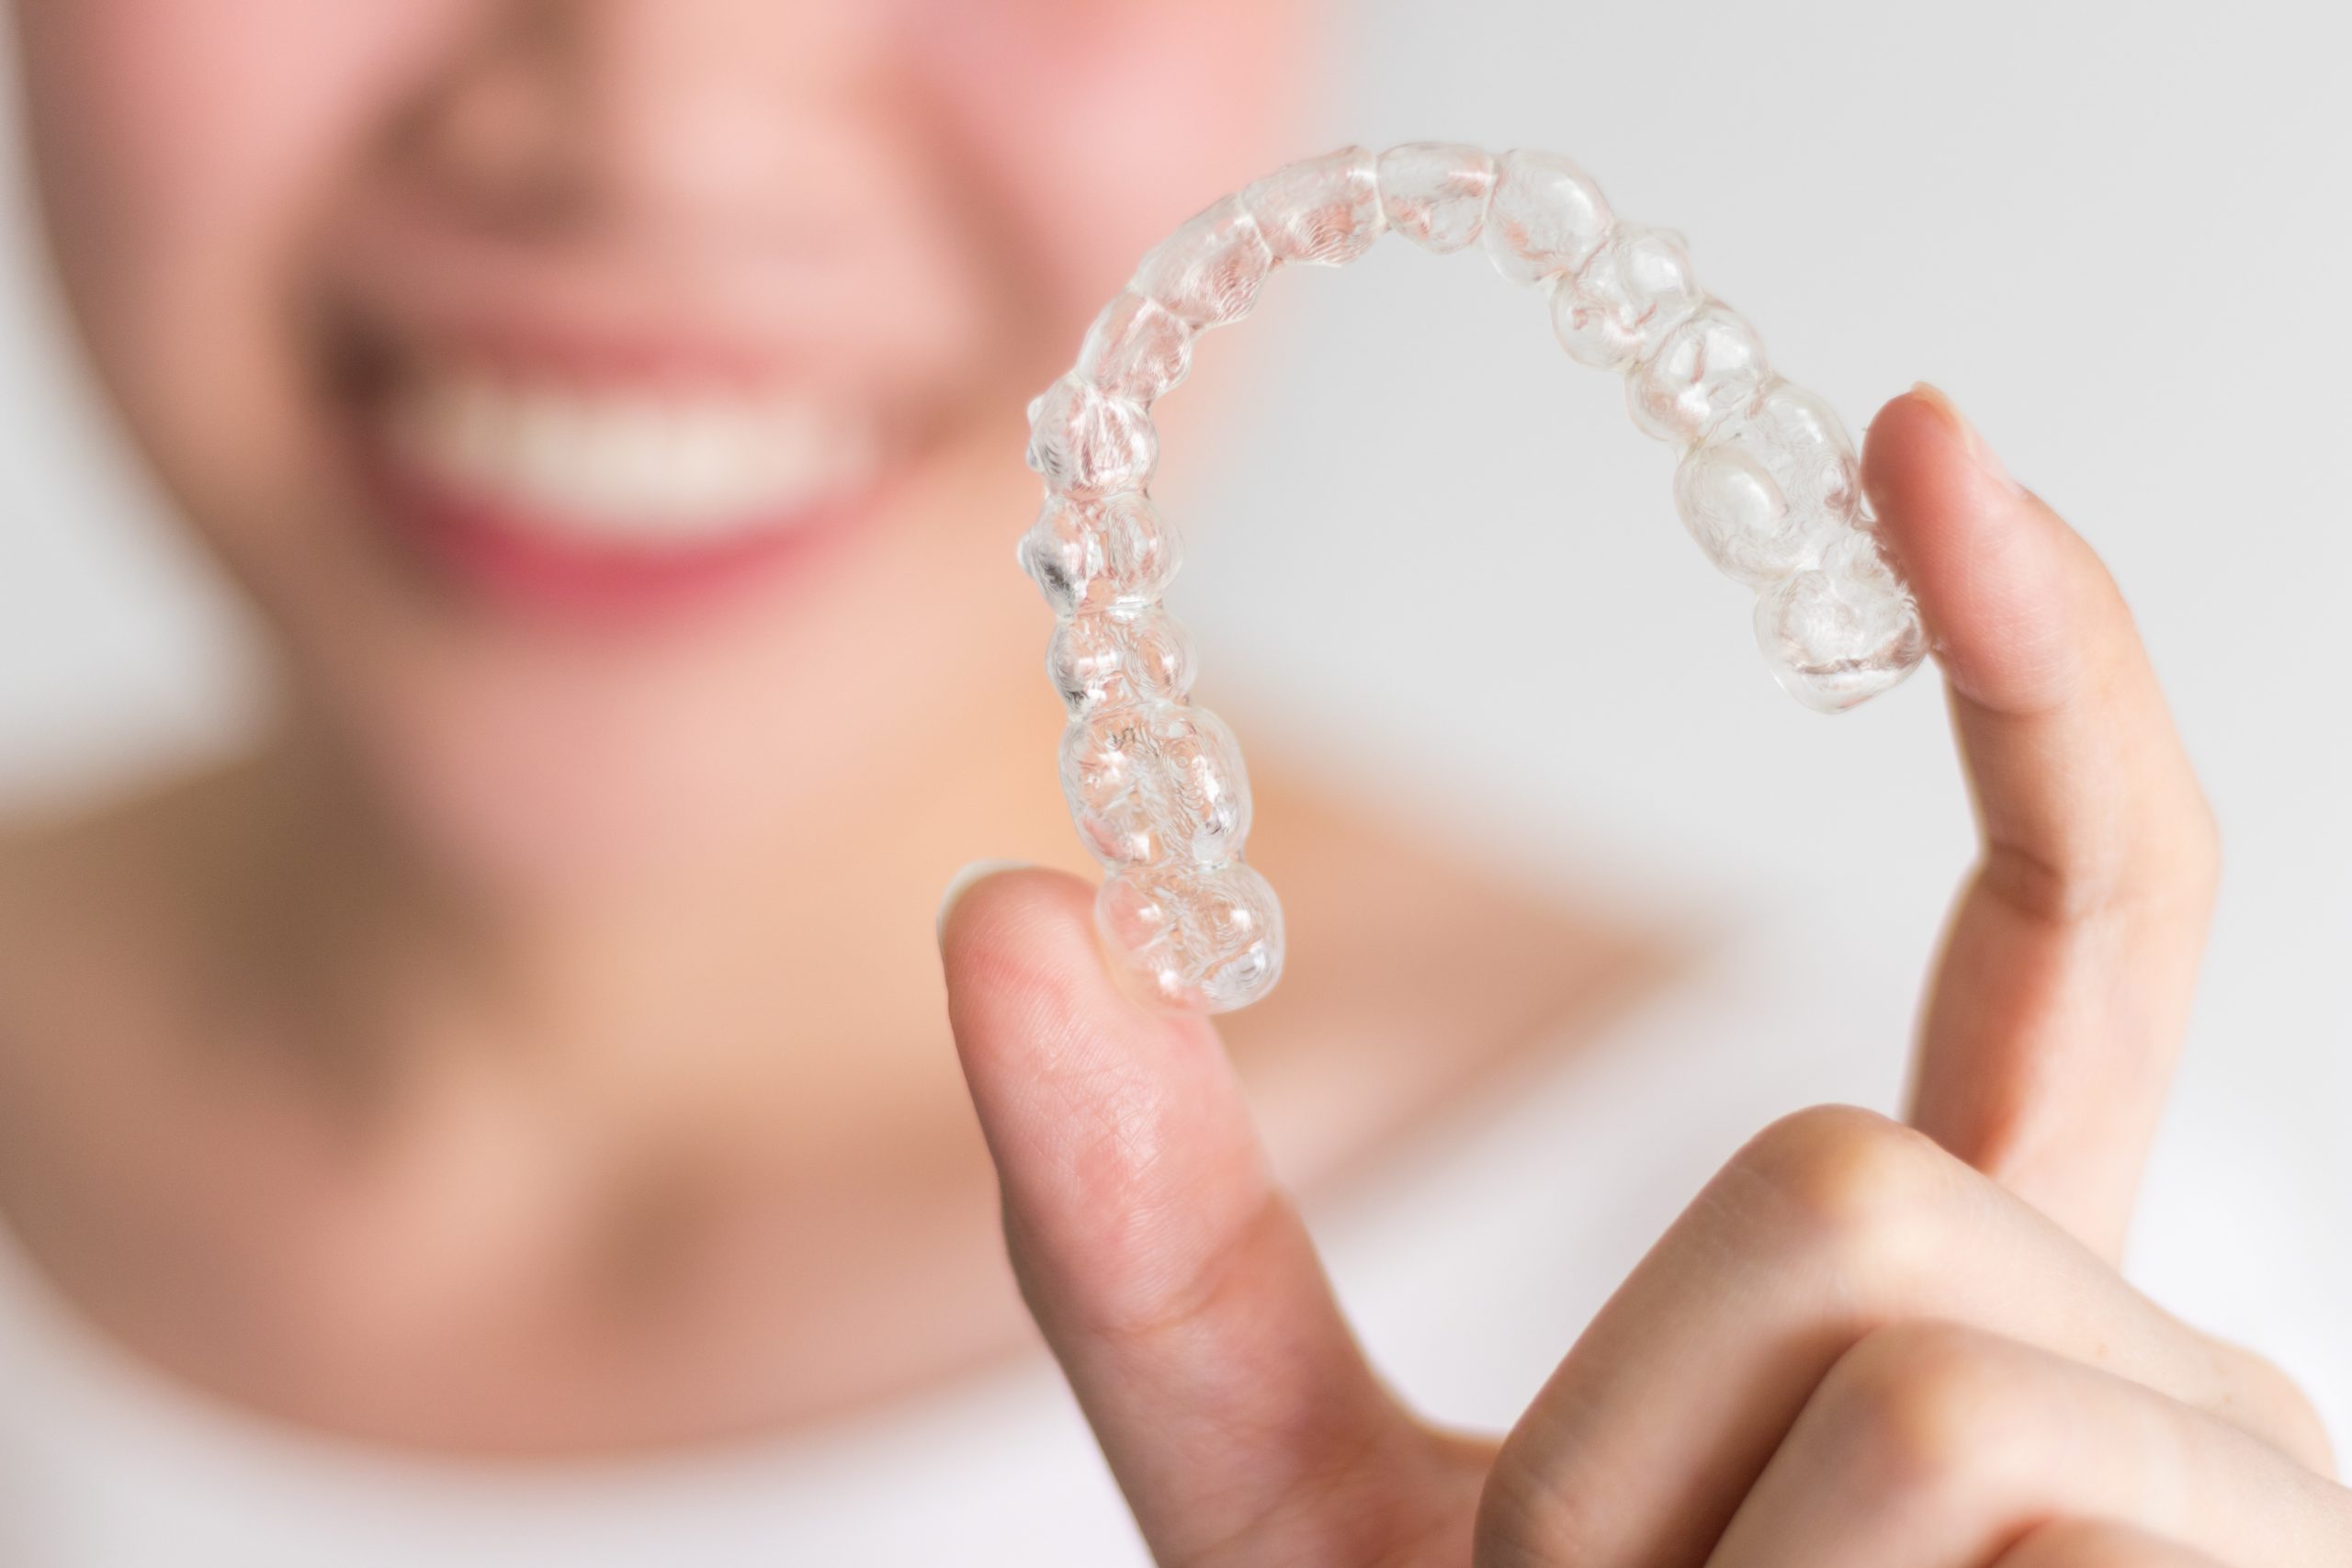 Smiling woman in a white shirt holding an Invisalign aligner between her pointer finger and thumb.